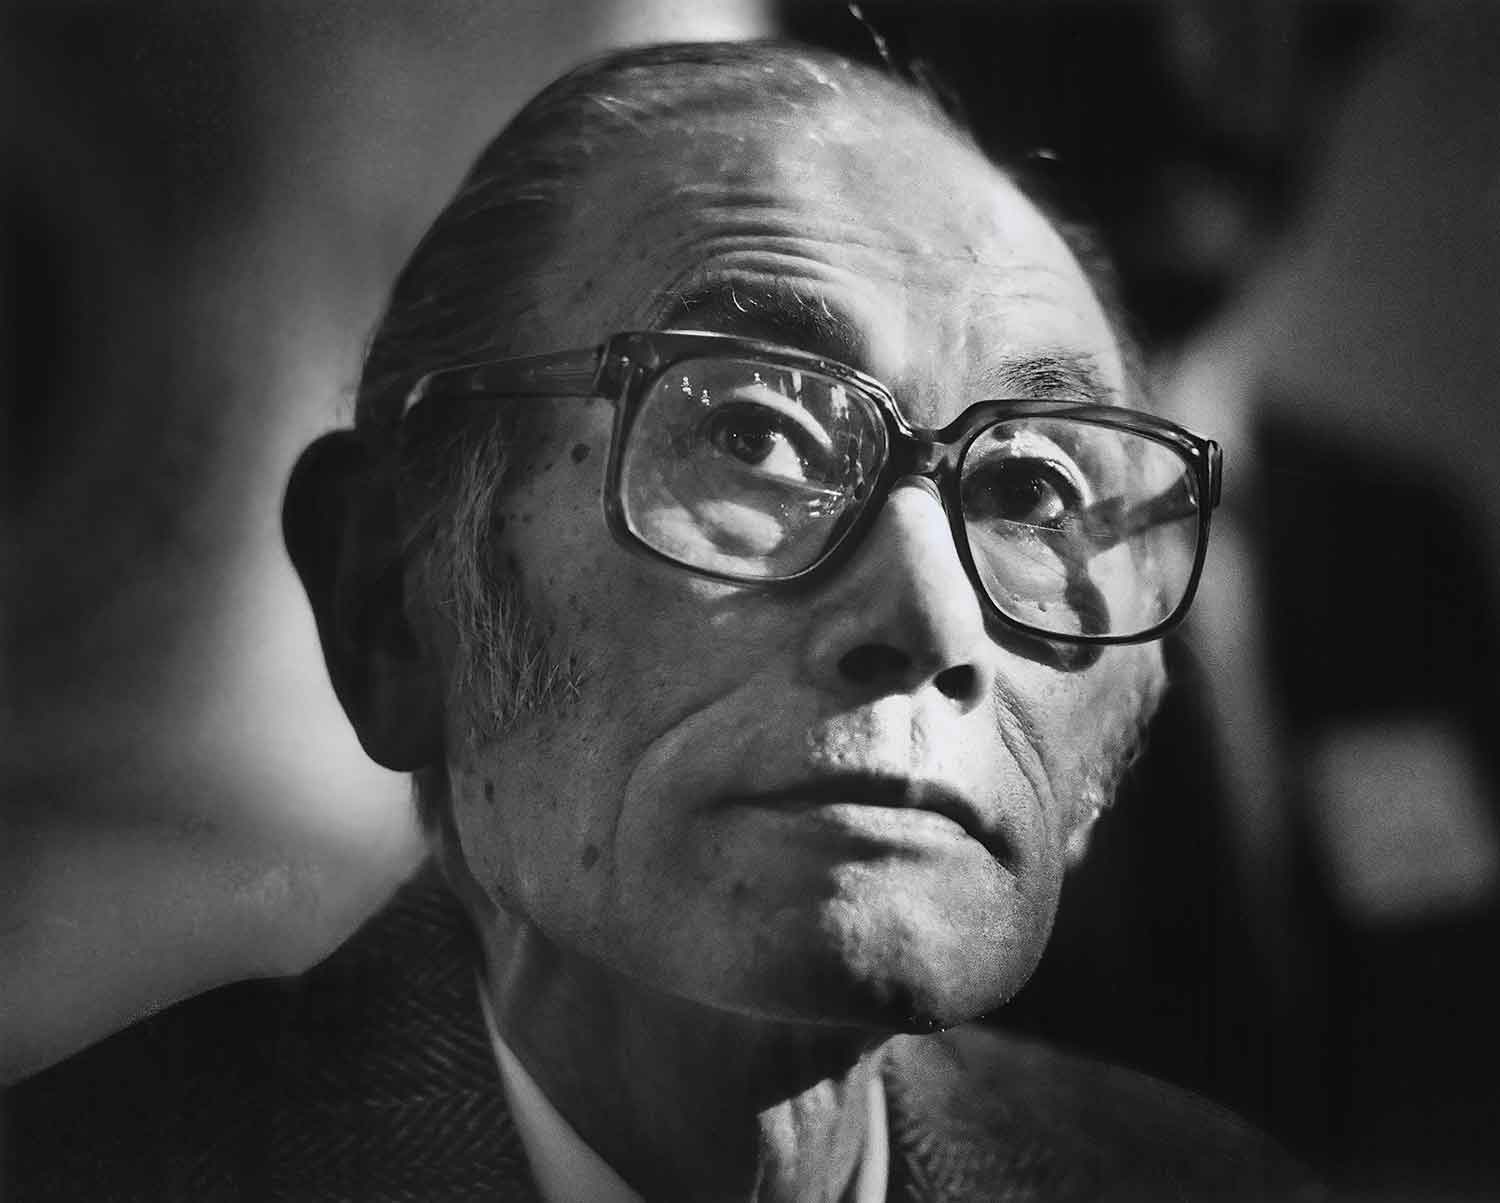 Black and white portrait of a man wearing a jacket and glasses.